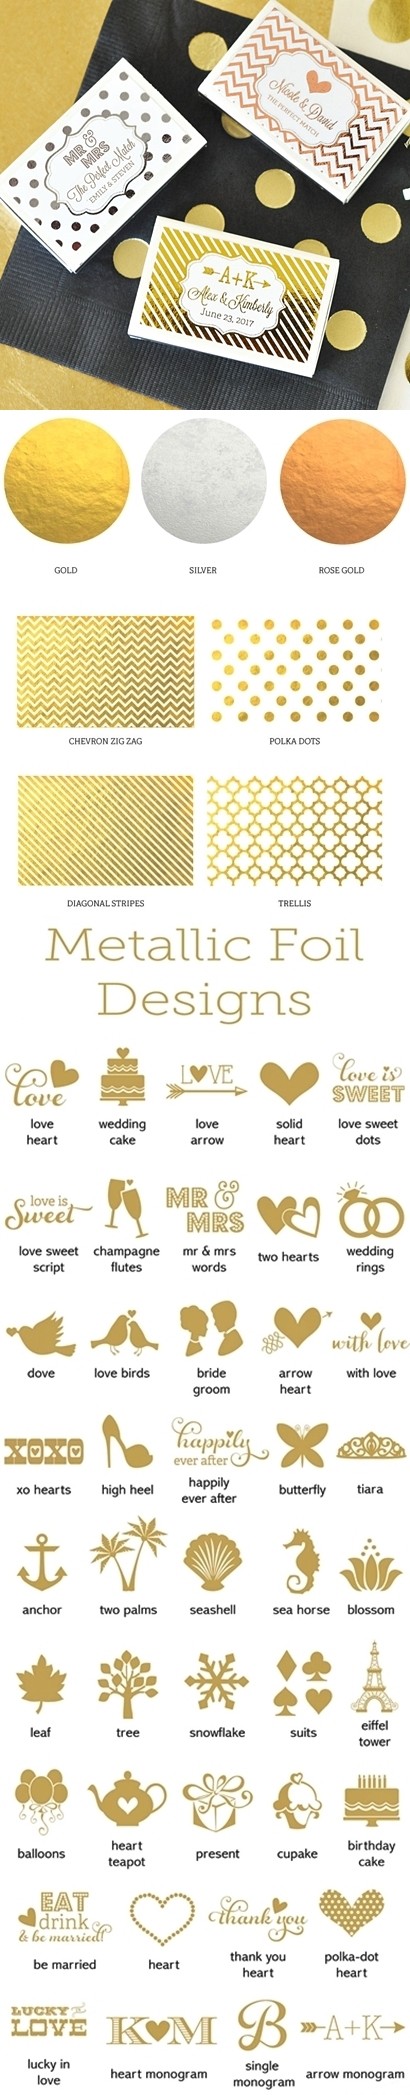 Metallic Foil Personalized Wedding Match Boxes (3 Colors) (Set of 50)